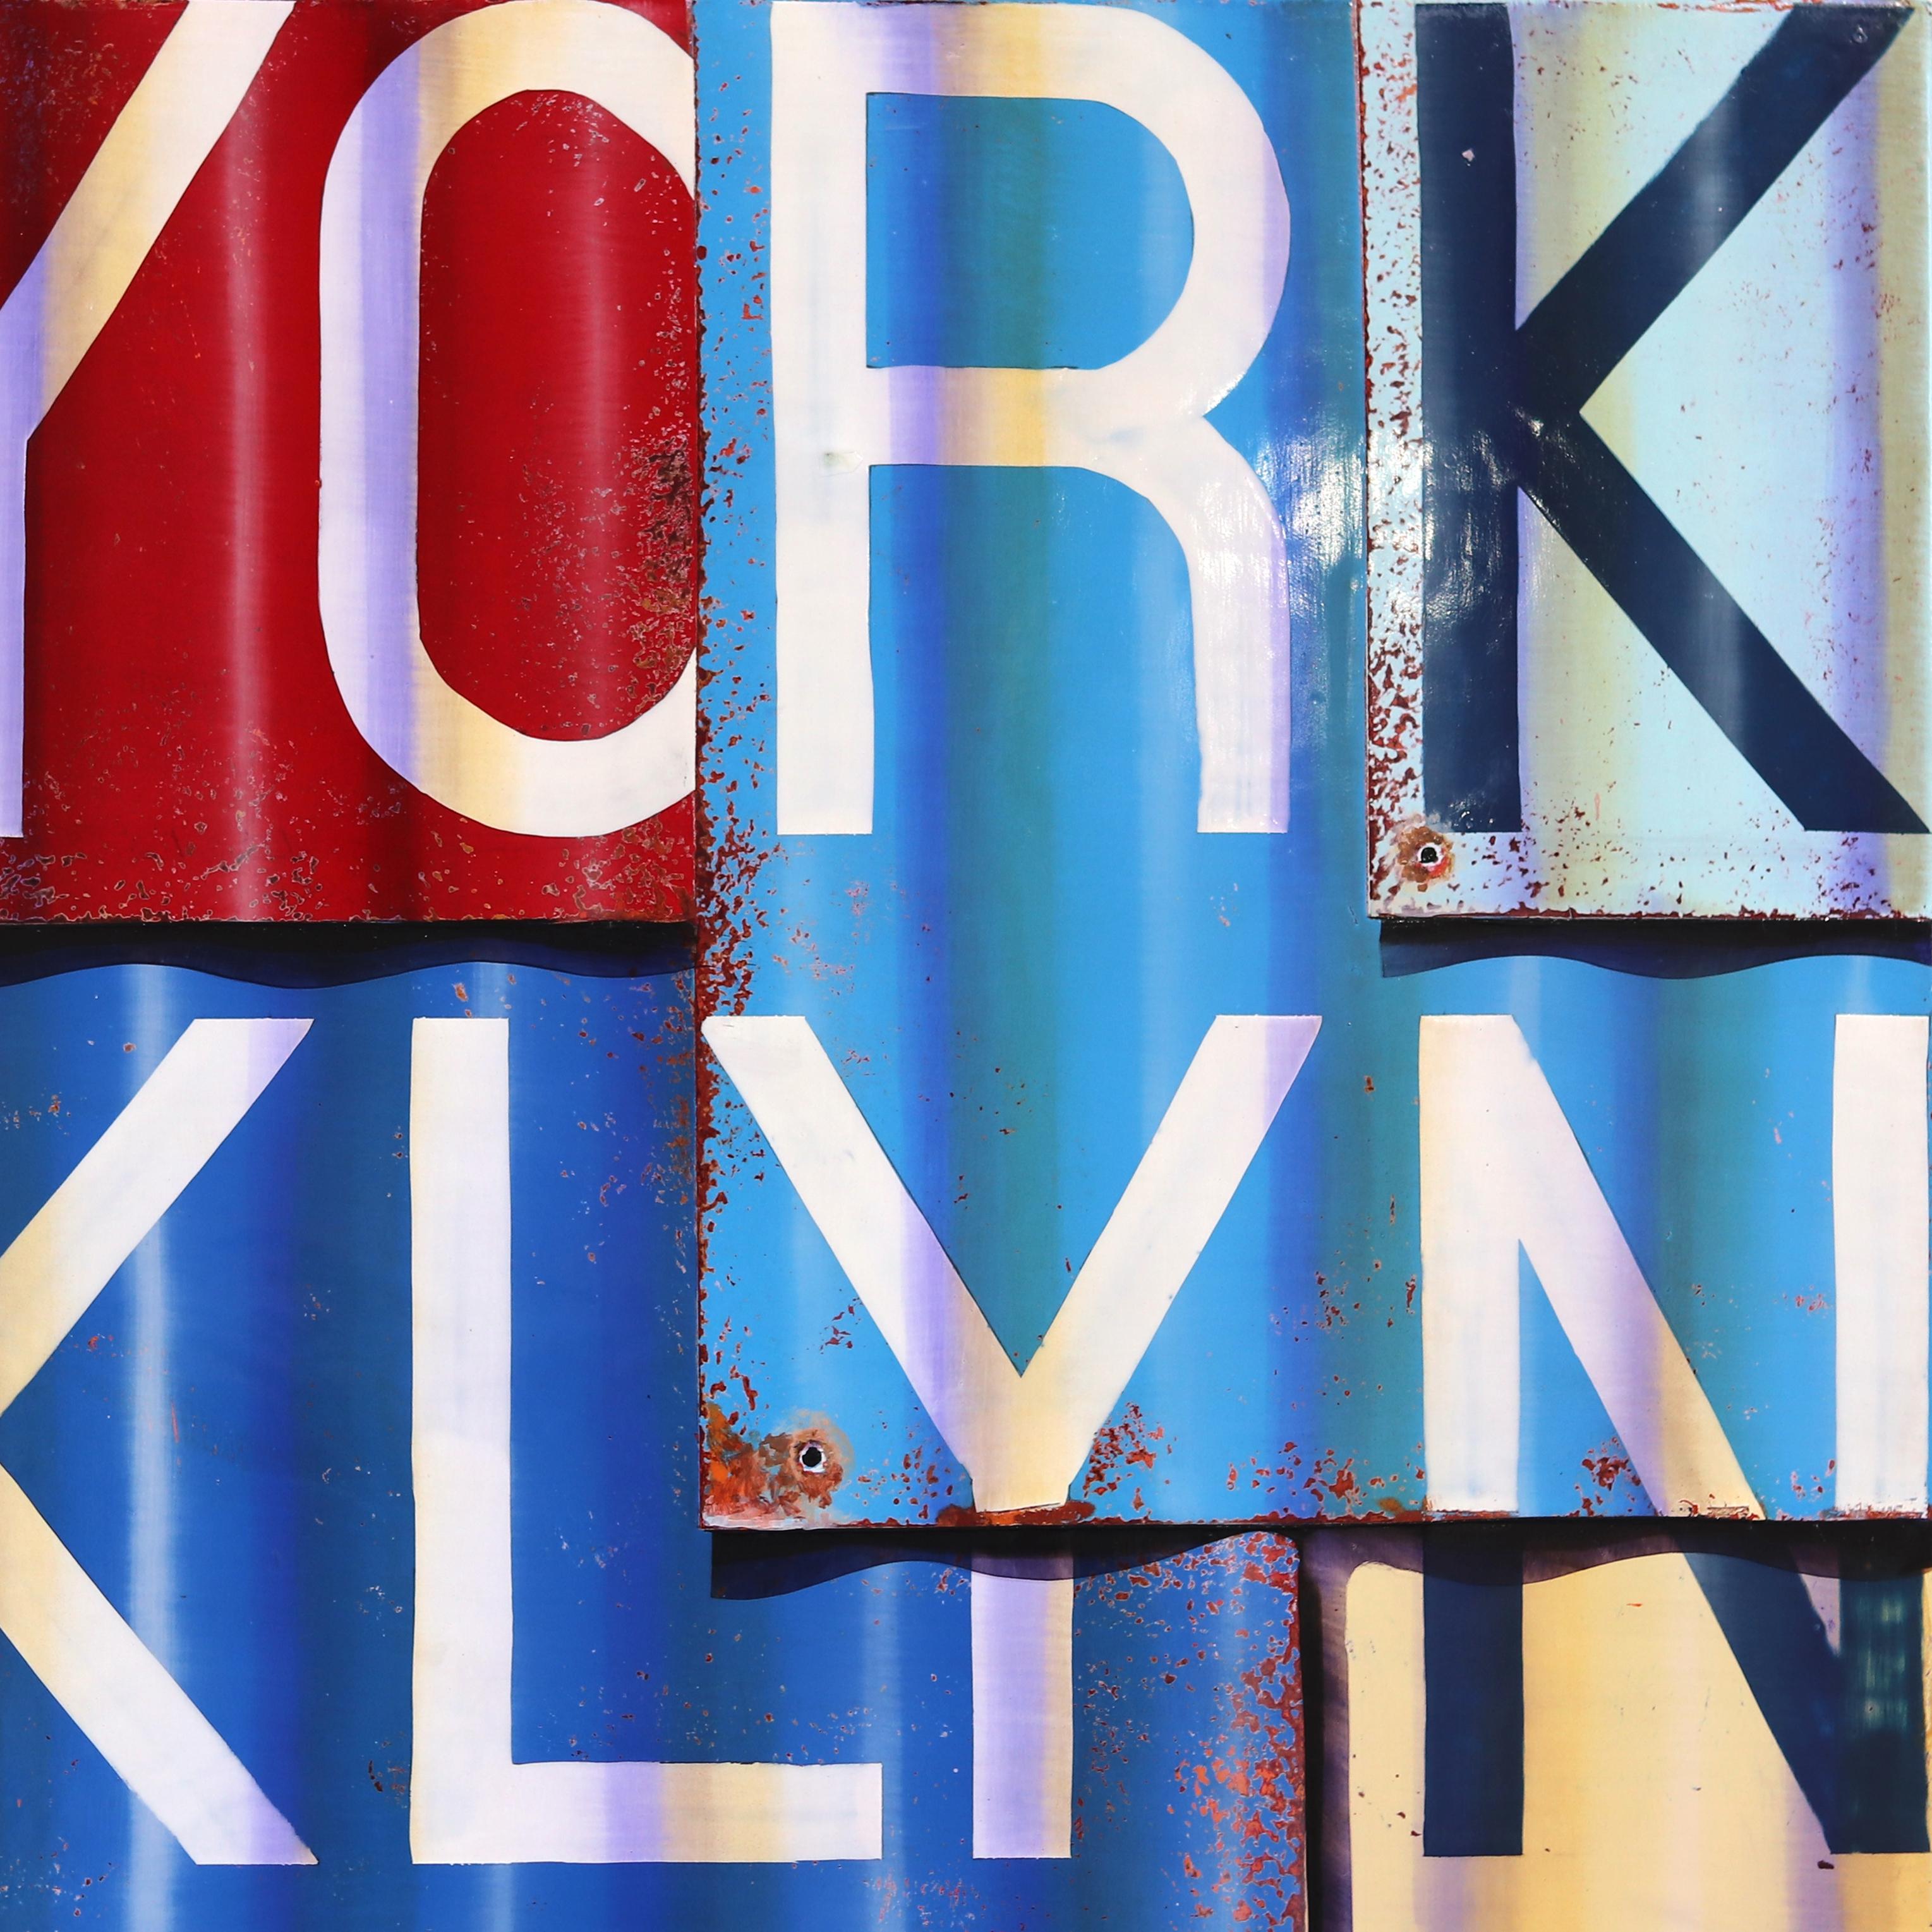 New York City - Photorealistic Oil and Enamel Painting on Canvas For Sale 3